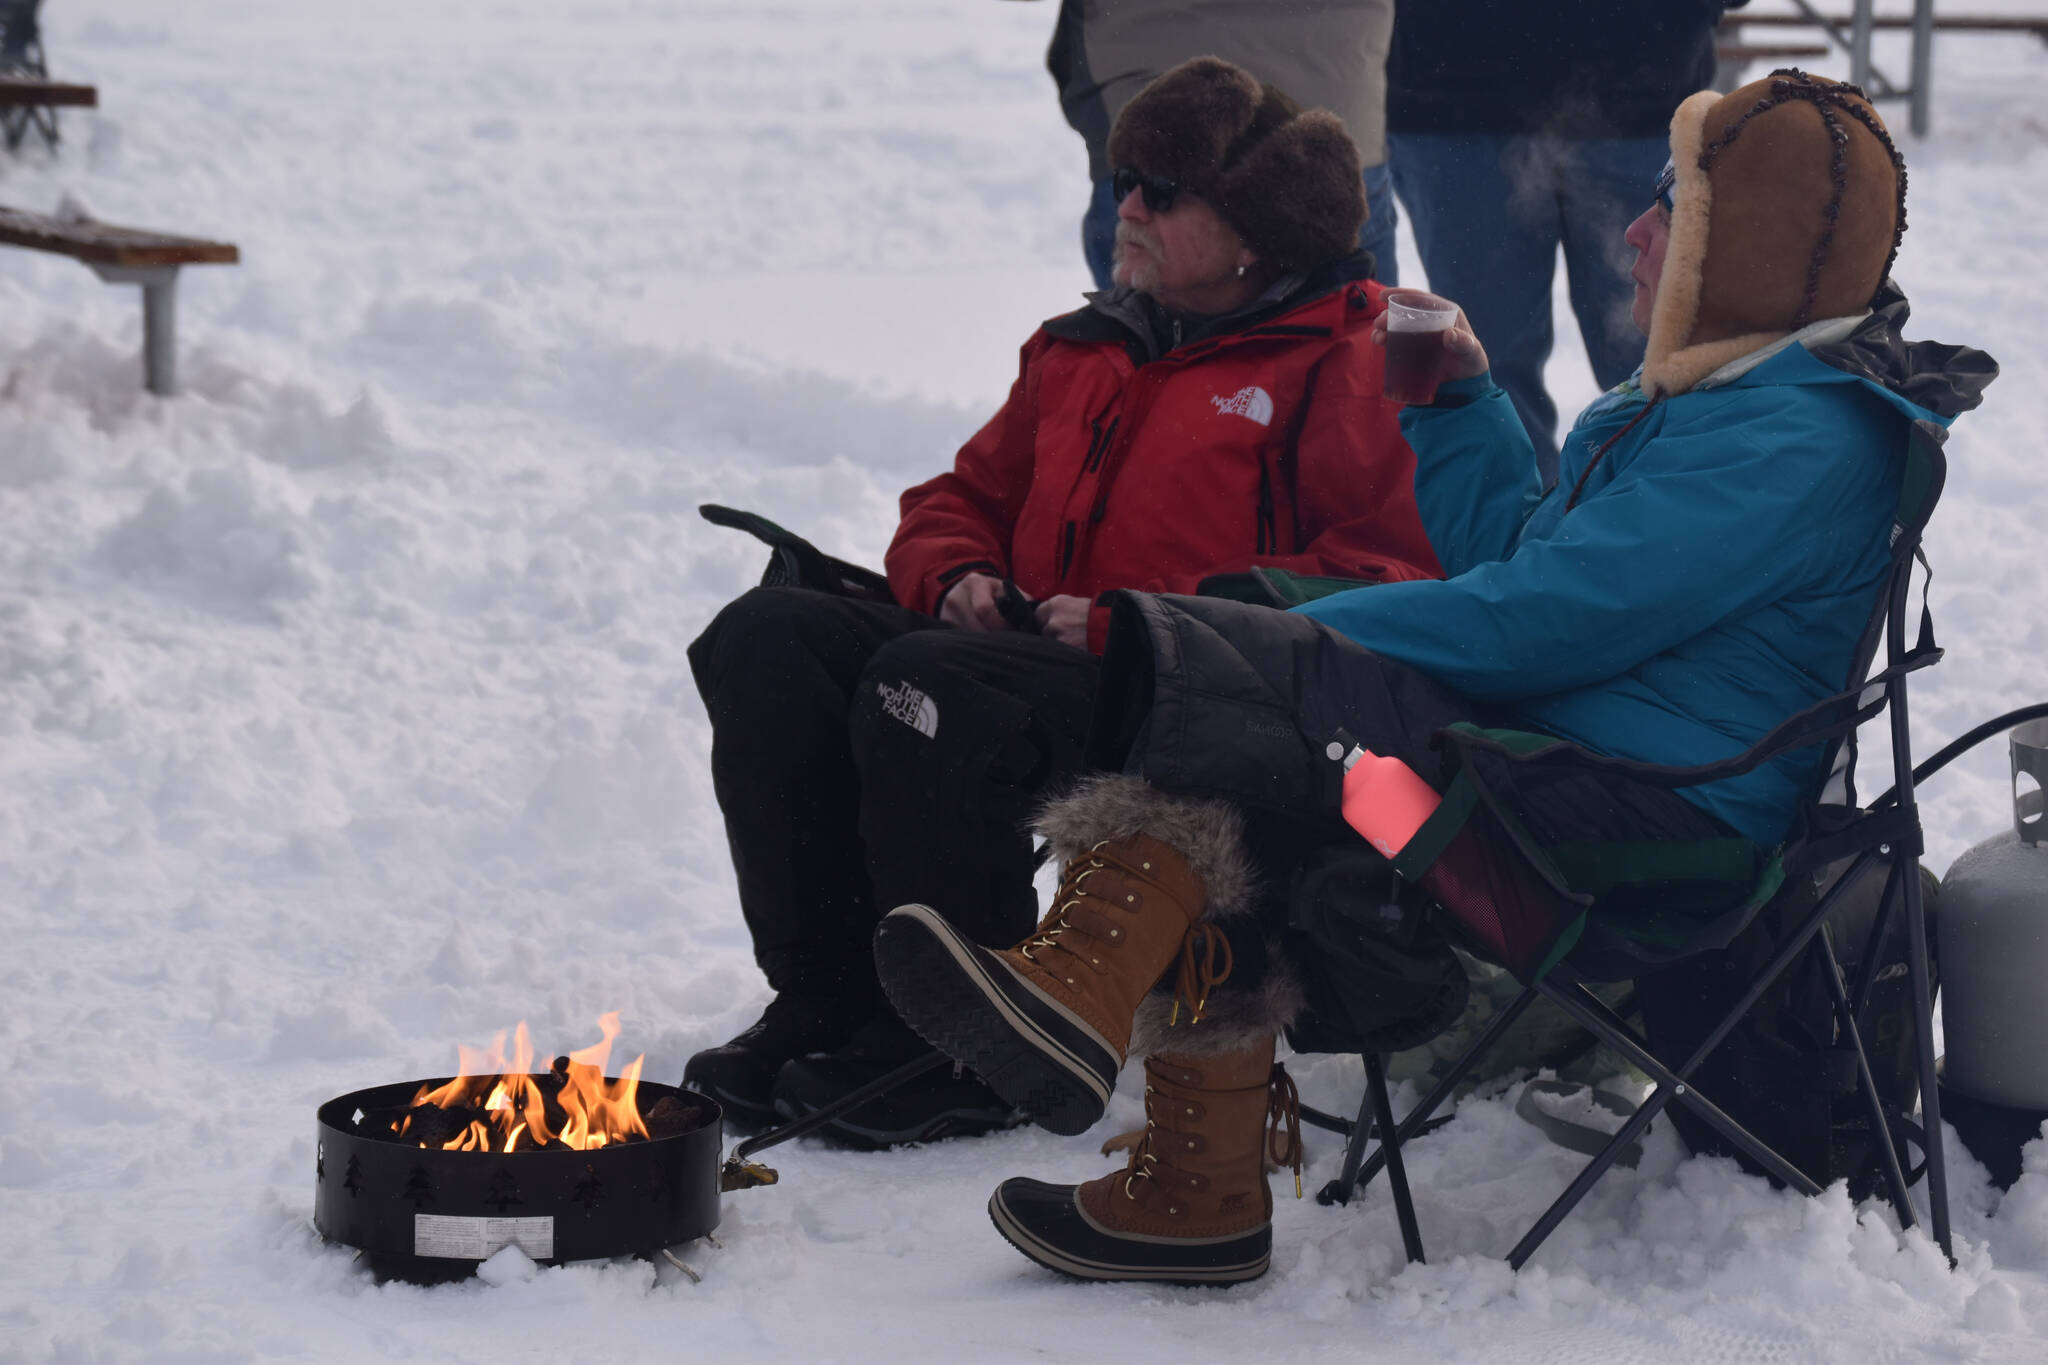 Attendees sip drinks and sit by the fire during Frozen RiverFest on Saturday, Feb. 18, 2023 at Soldotna Creek Park in Soldotna, Alaska. (Jake Dye/Peninsula Clarion)